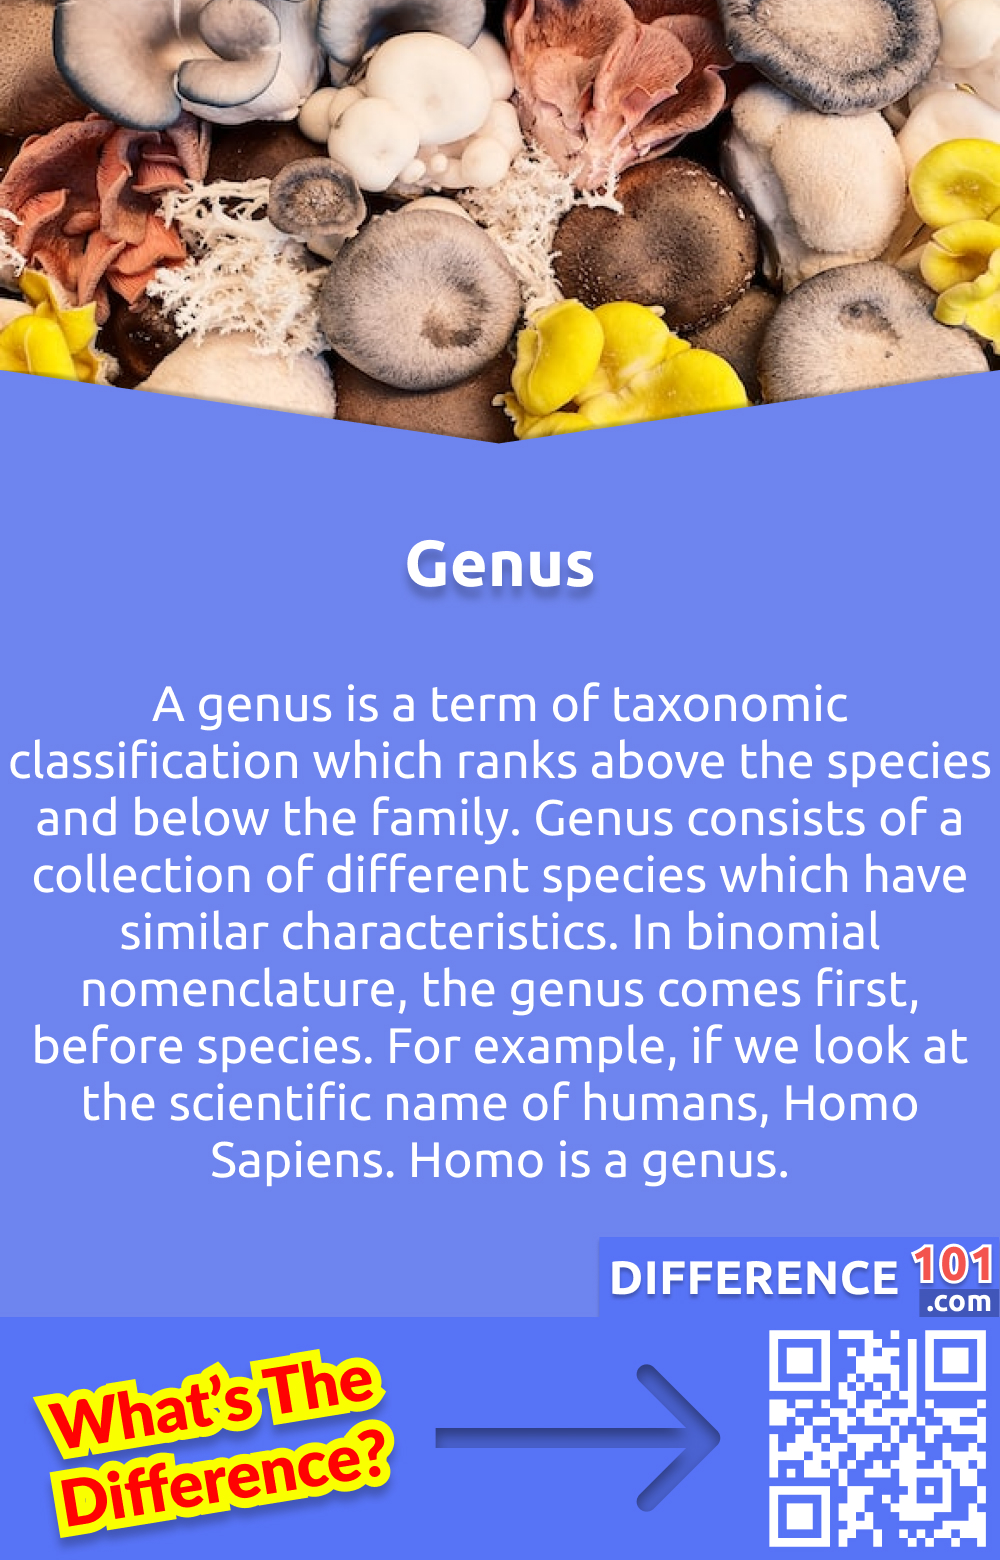 What Is Genus? A genus is a term of taxonomic classification which ranks above the species and below the family. Genus consists of a collection of different species which have similar characteristics. In binomial nomenclature, the genus comes first, before species. For example, if we look at the scientific name of humans, Homo Sapiens. Homo is a genus.